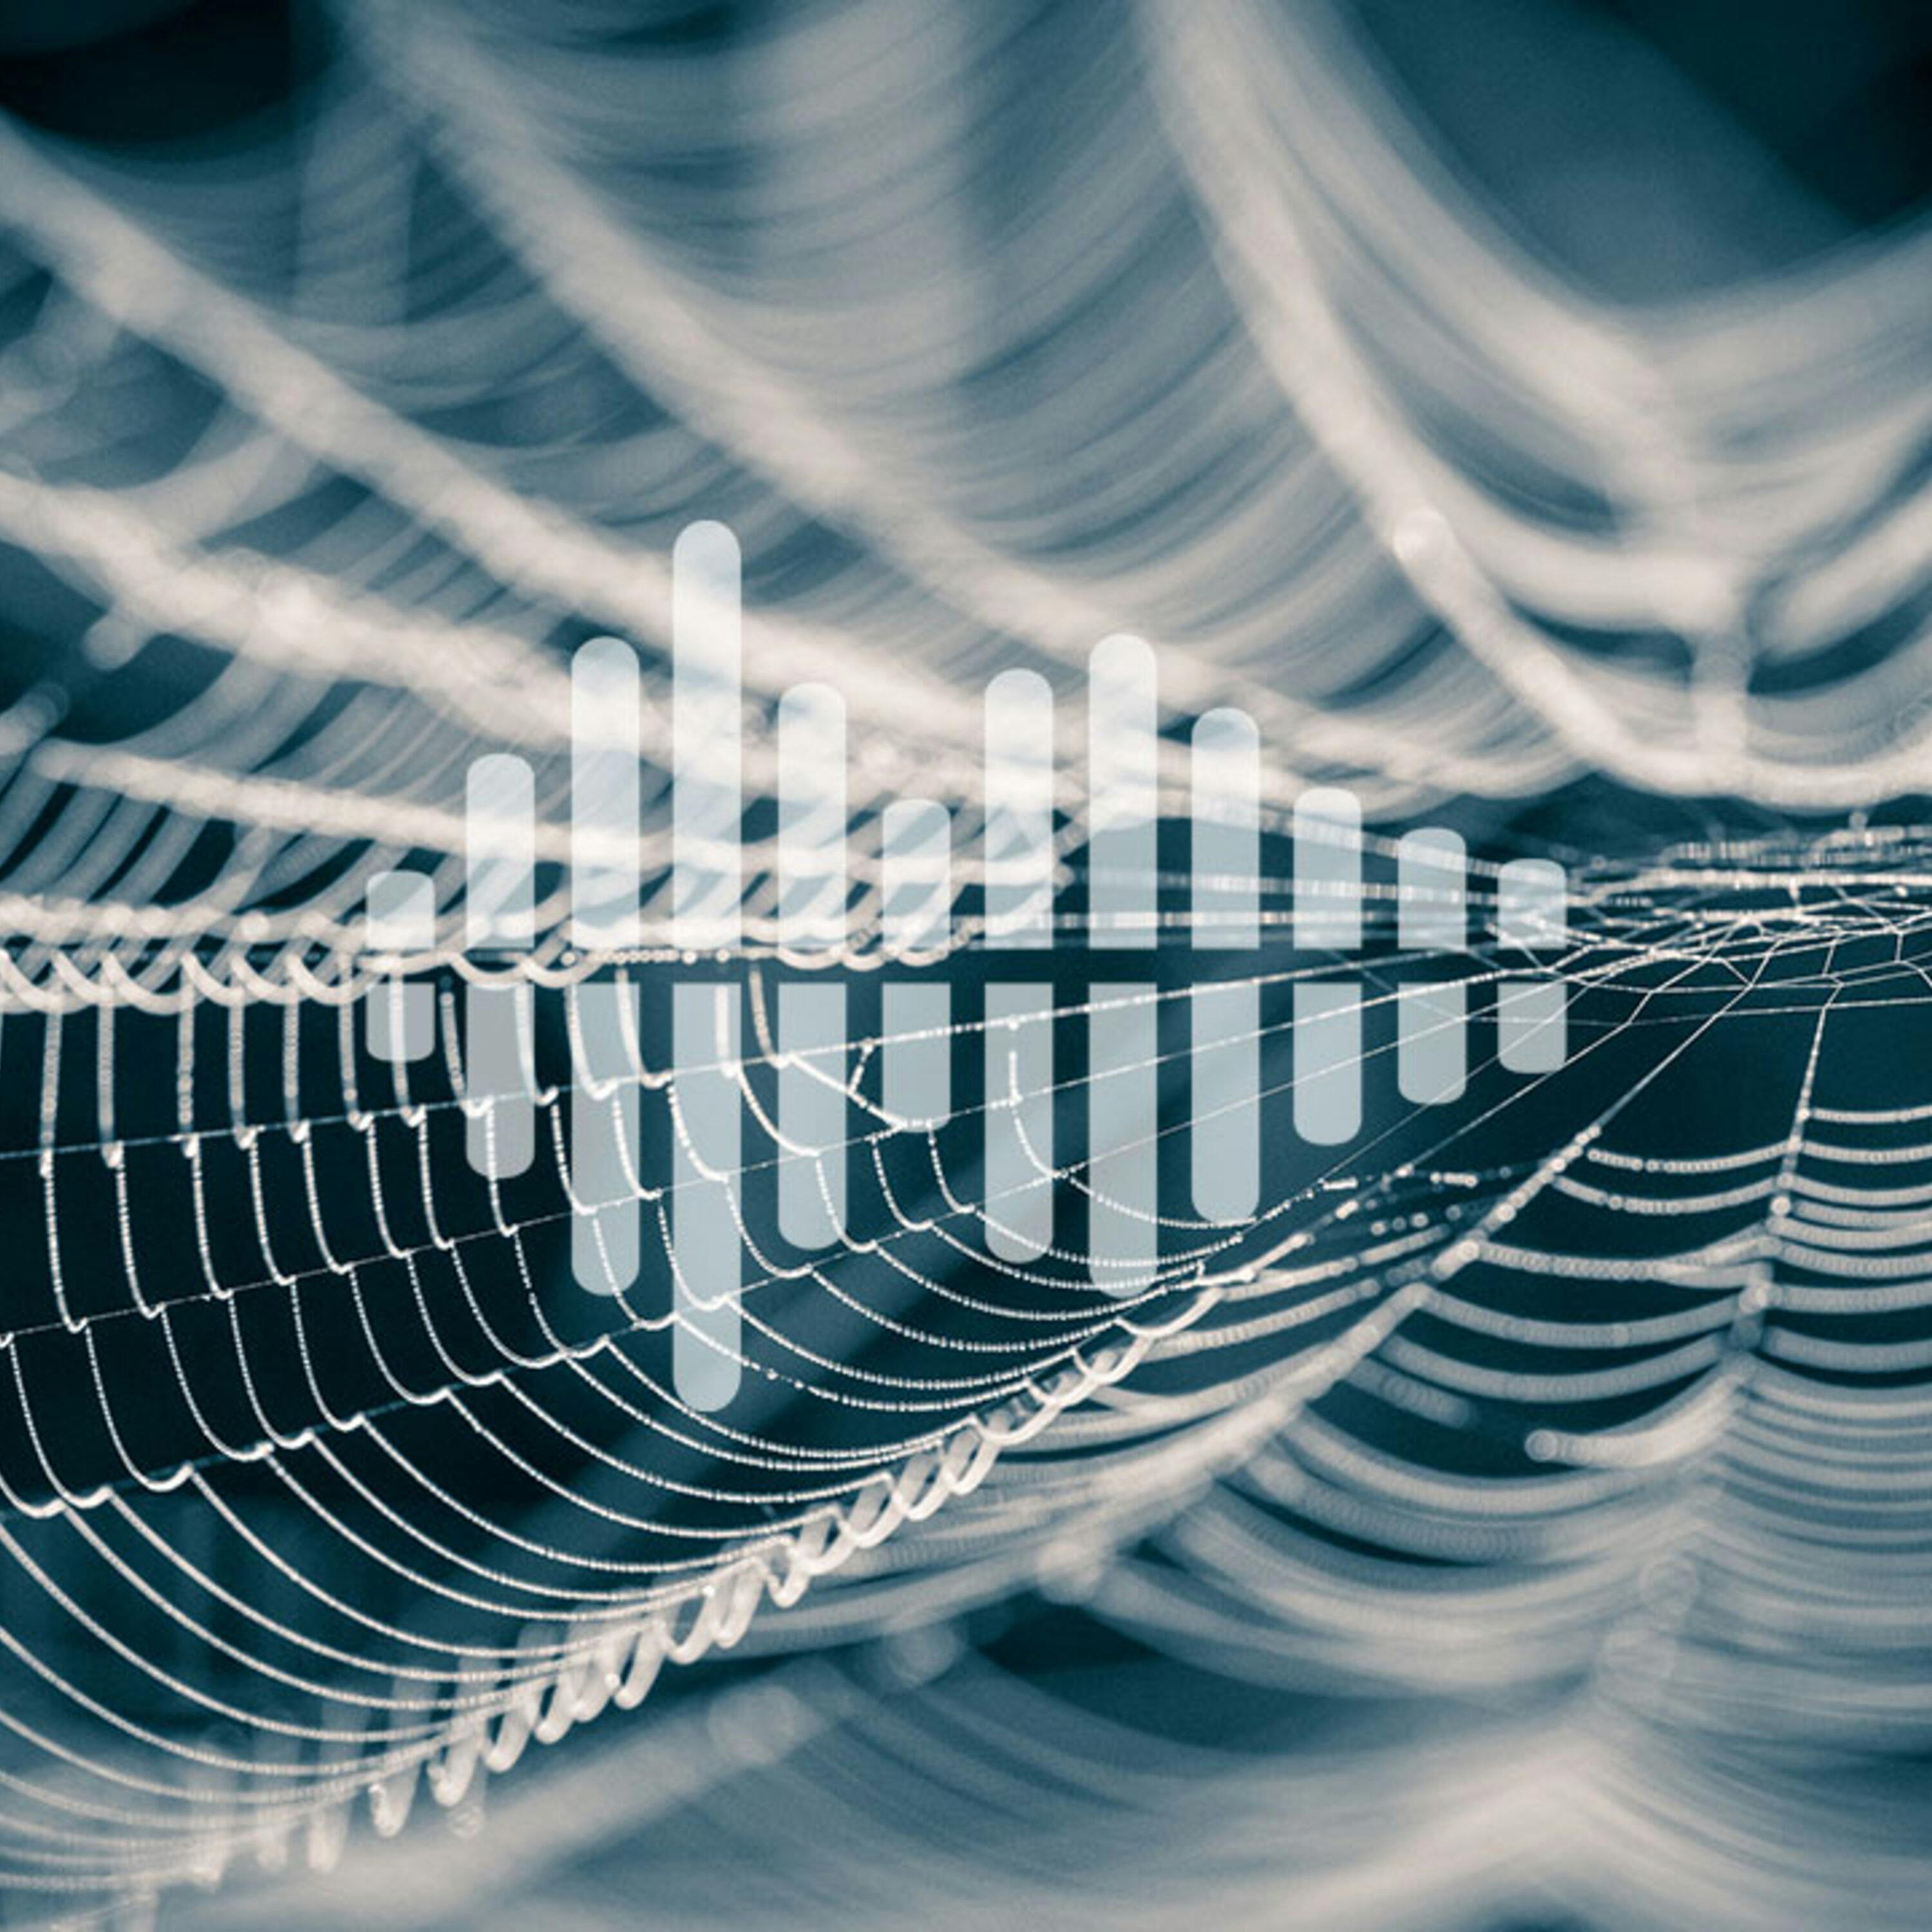 Climate change threatens supercomputing, and collecting spider silks